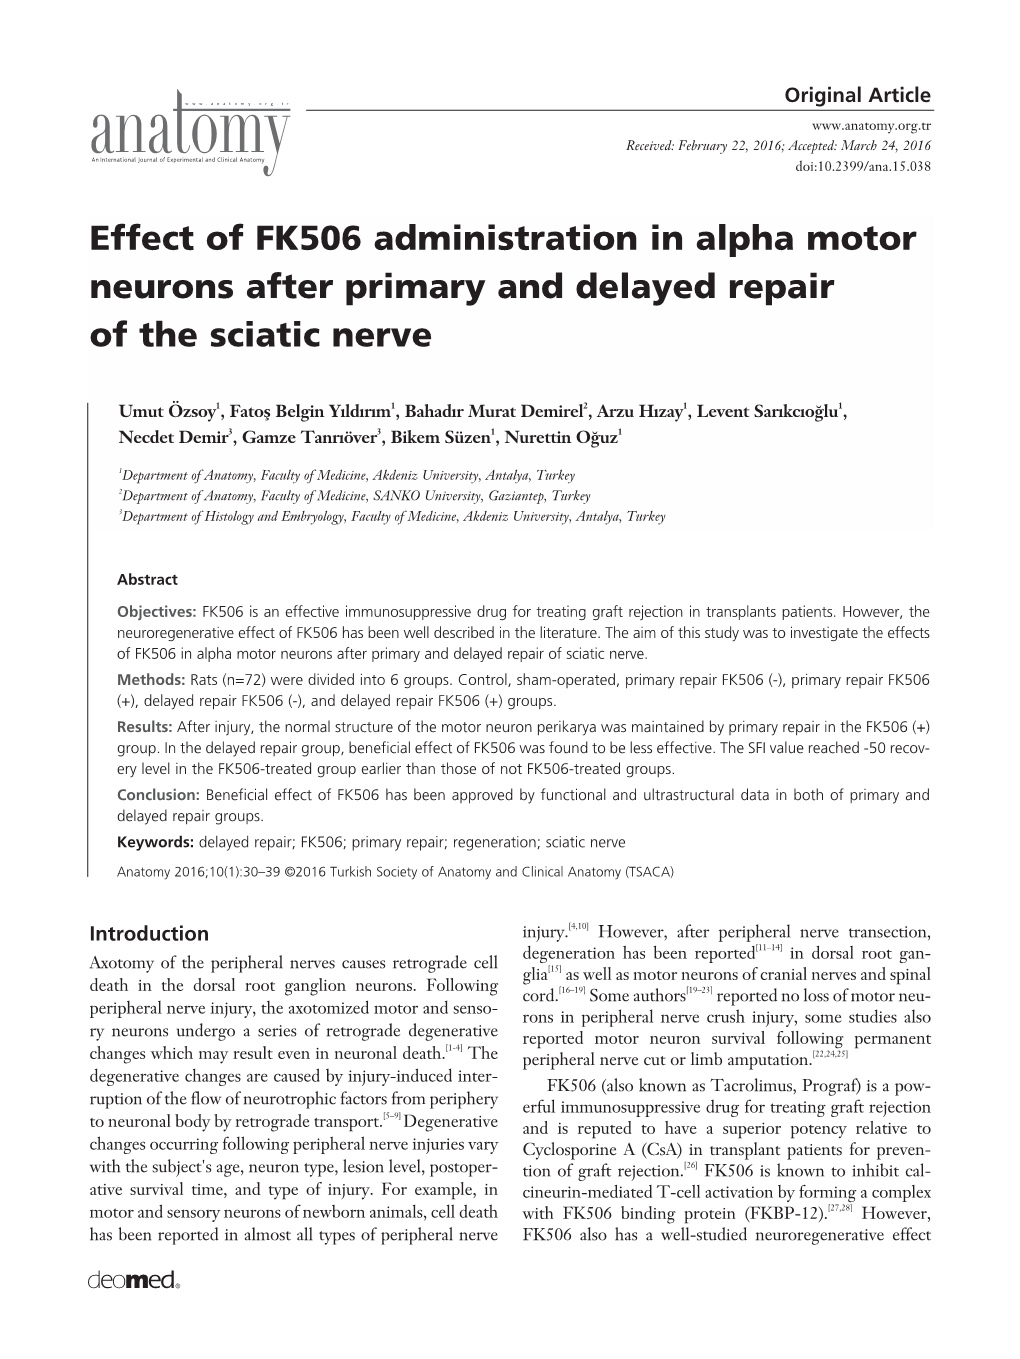 Effect of FK506 Administration in Alpha Motor Neurons After Primary and Delayed Repair of the Sciatic Nerve